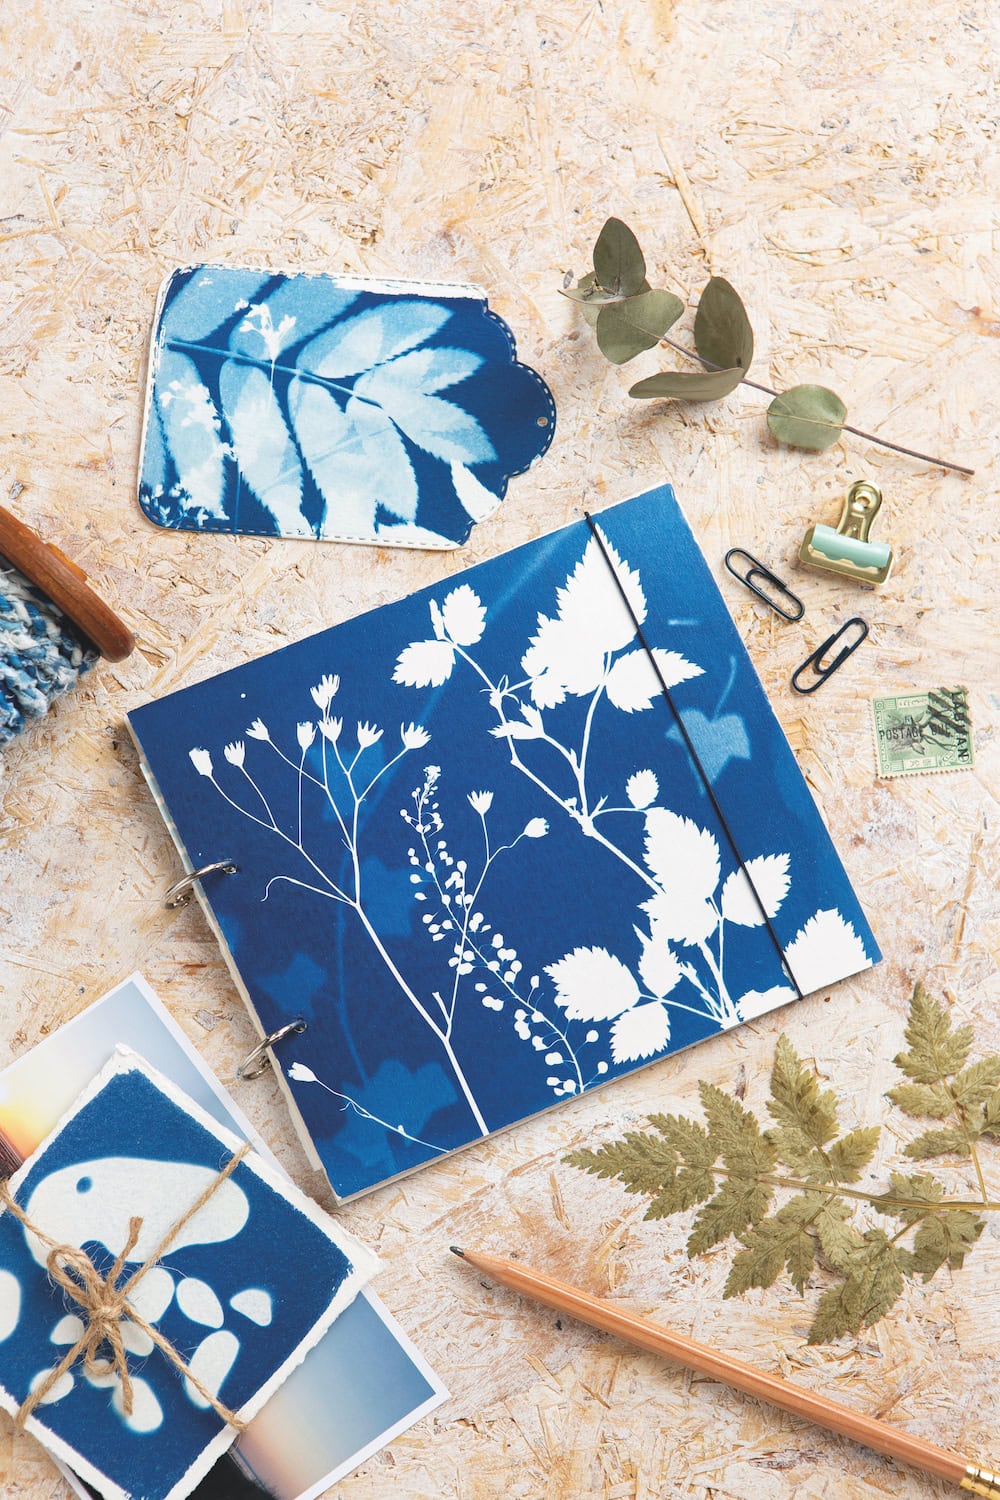 cyanotype nature journal design by kim tillyer from her new book Beginner's Guide to Cyanotype. We have four signed copies to give away as well as a free diy tutorial by kim for you to try your hand at this highly enjoyable and creative craft